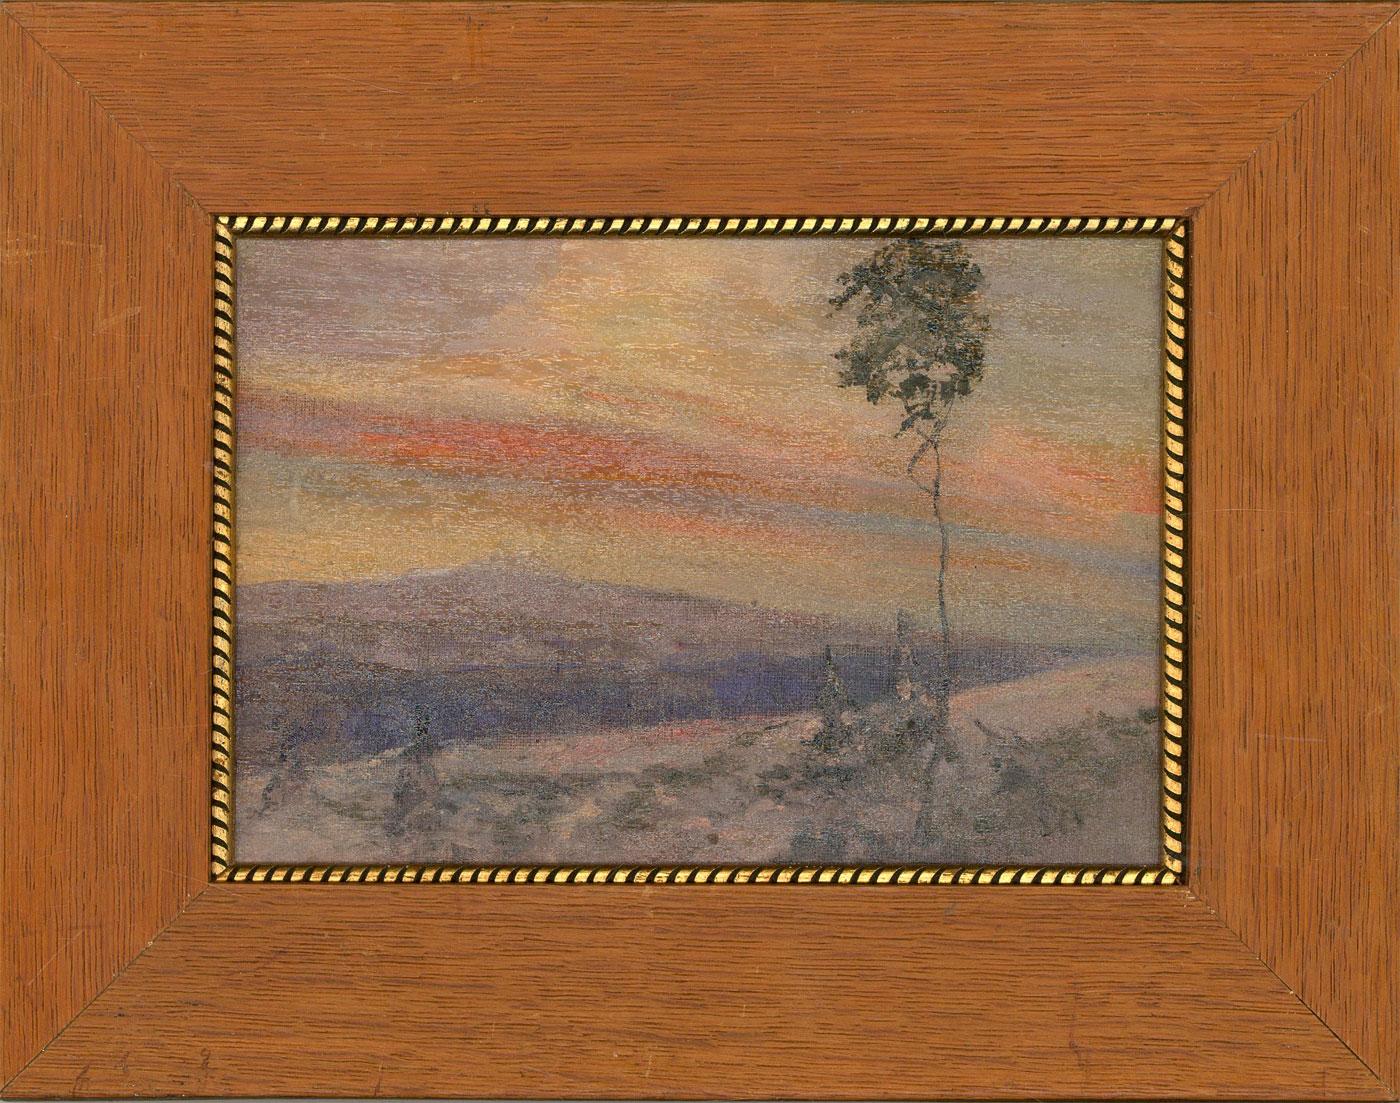 Unknown Landscape Painting - Nelson Kingsley (1863-1945) - Signed & Framed 19th Century Oil, American Sunset